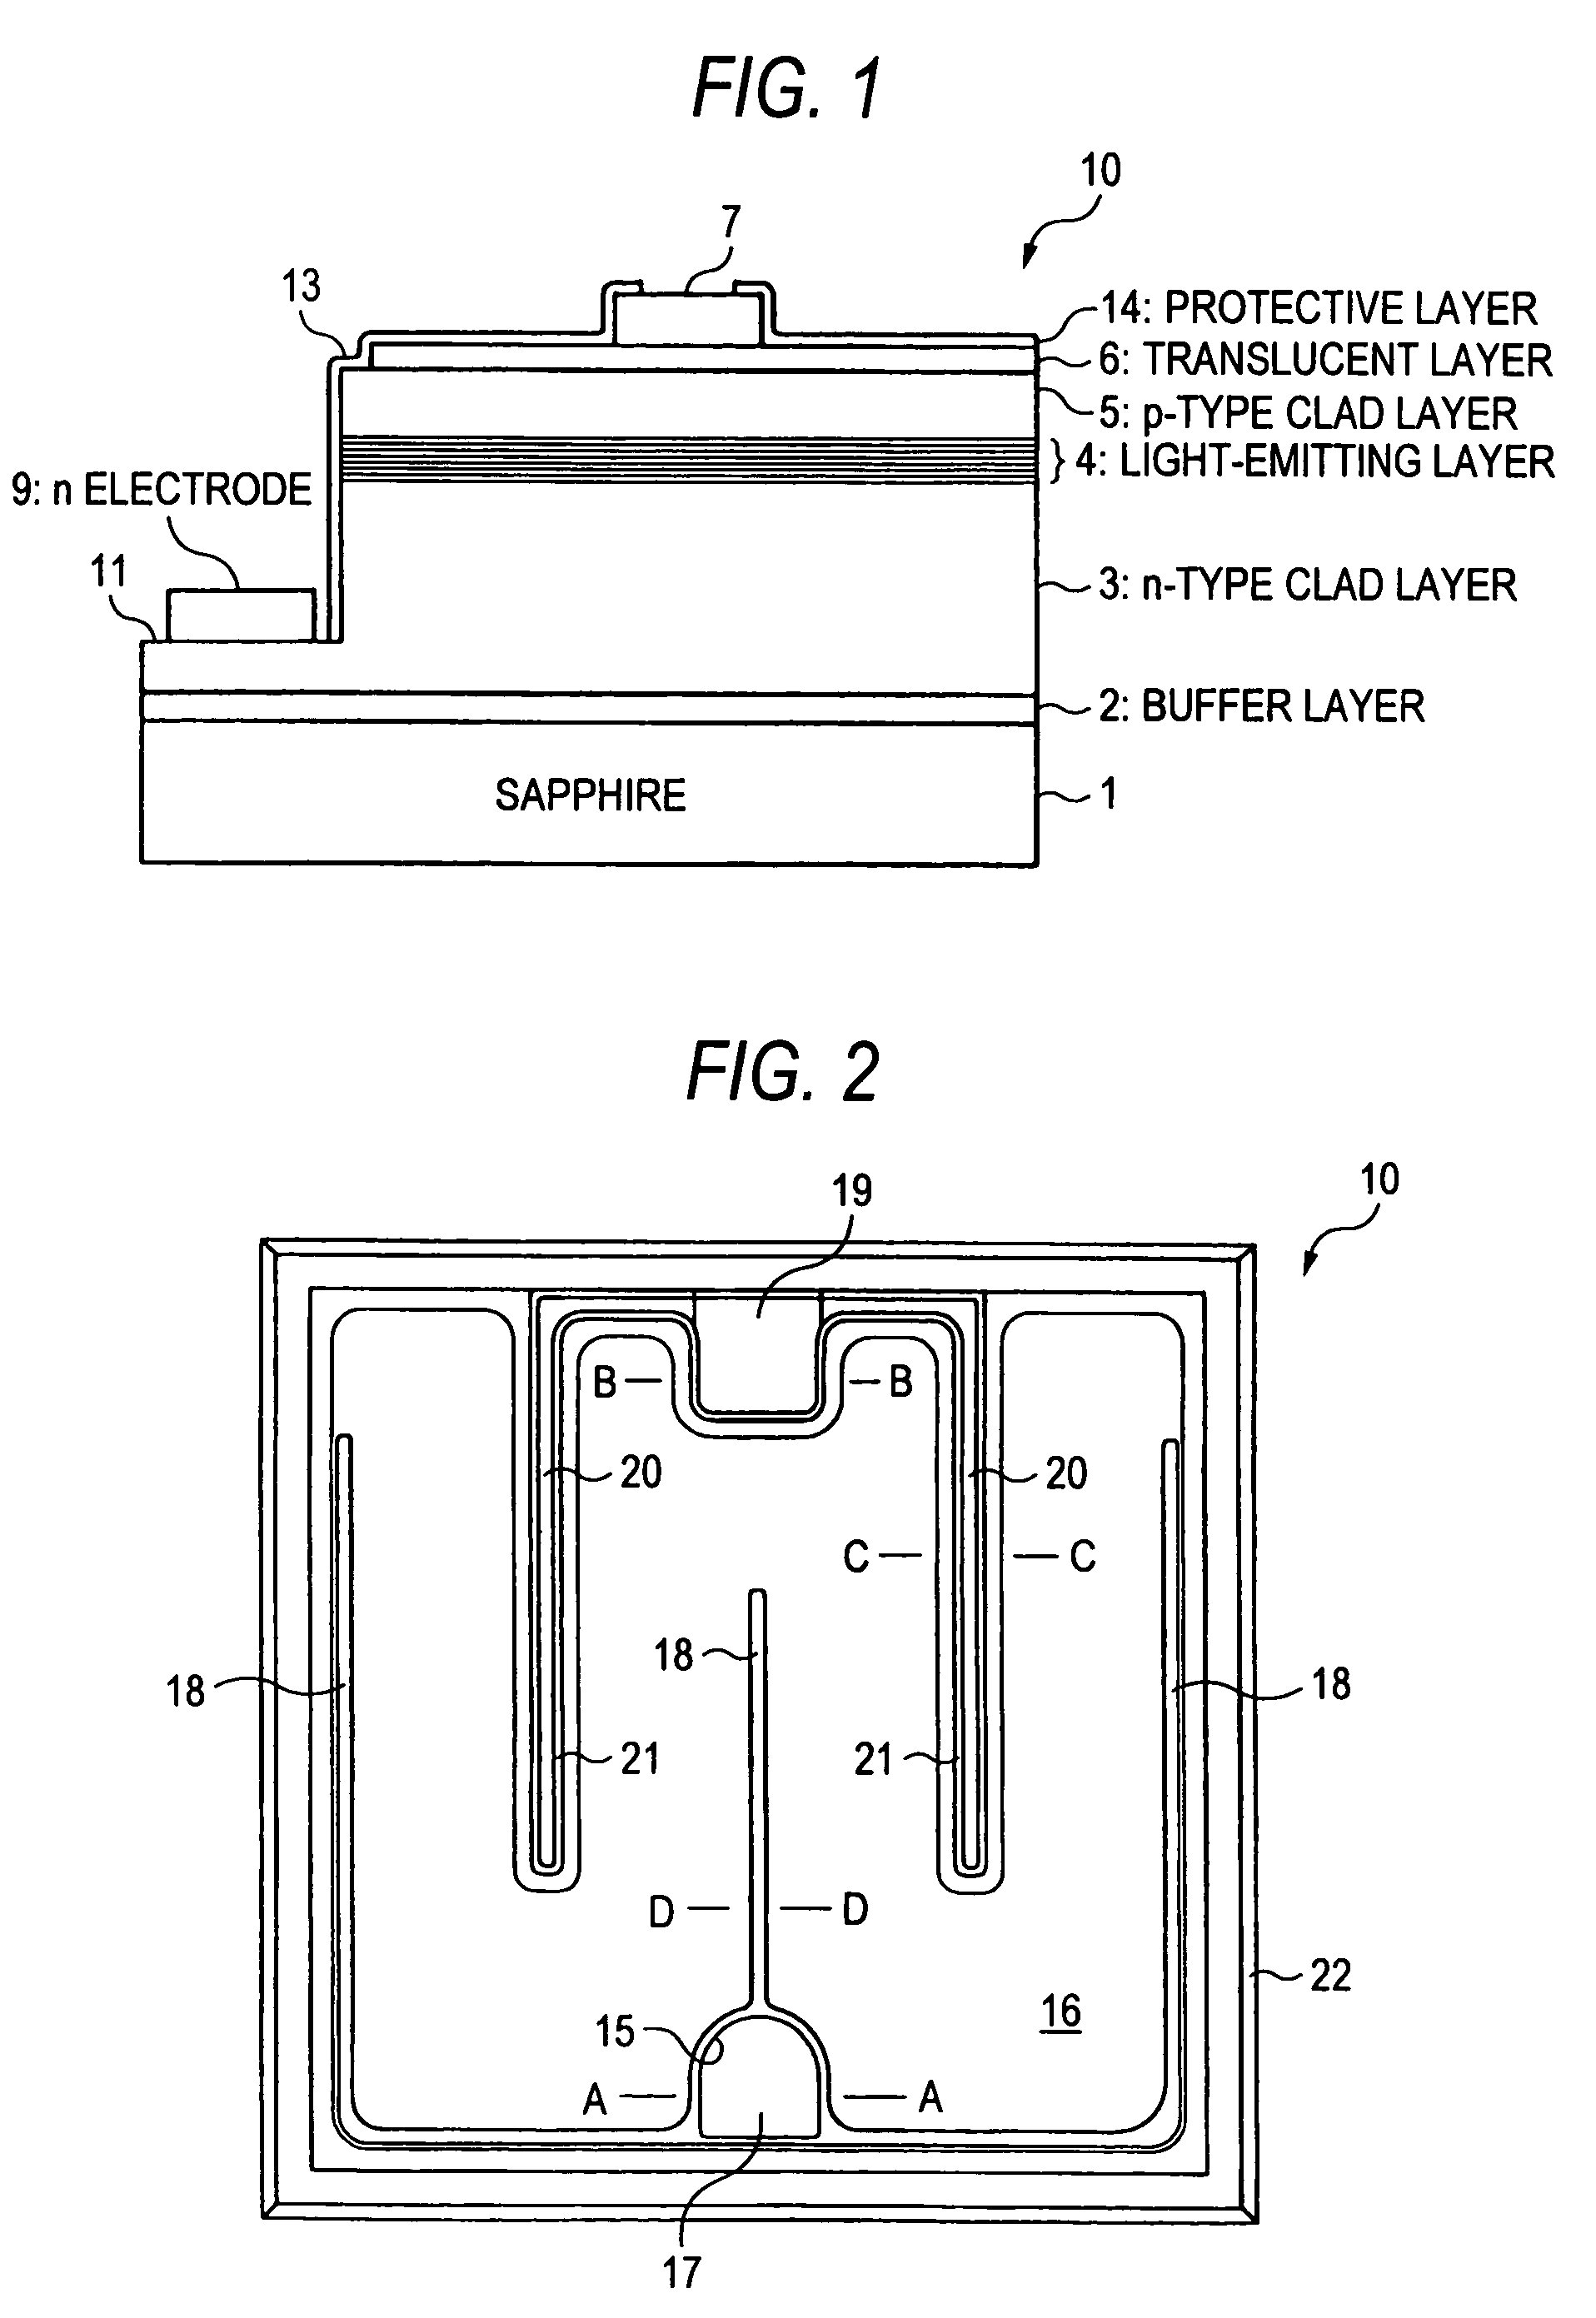 Group III nitride compound semiconductor device